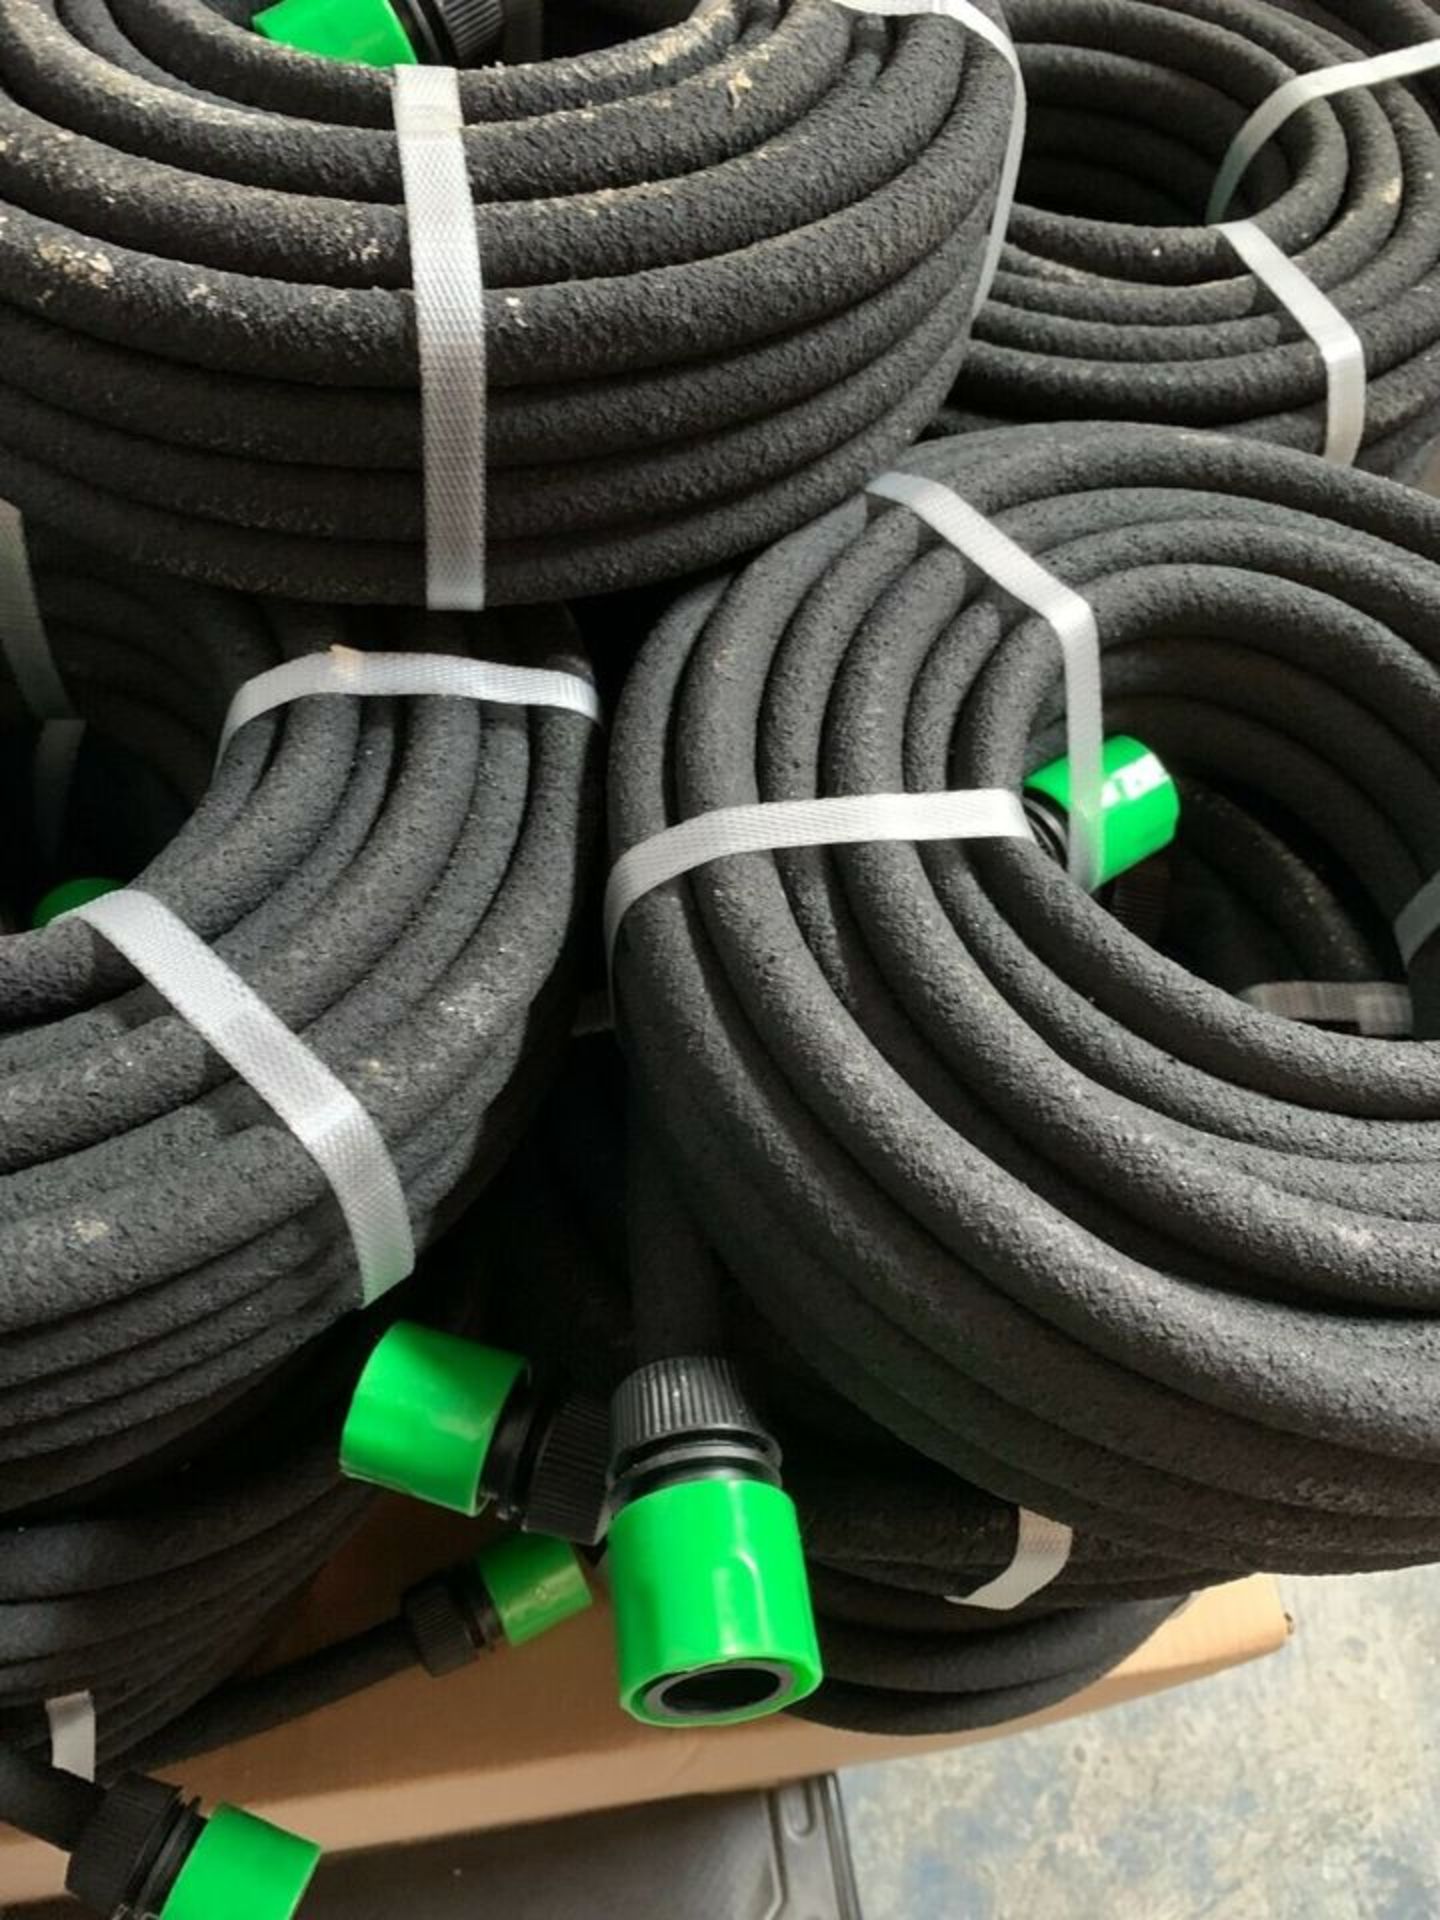 JOBLOT WHOLESALE OF 50 X GARDEN POROUS SOAKER HOSE AUTOMATIC DRIP LEAKY WATERING